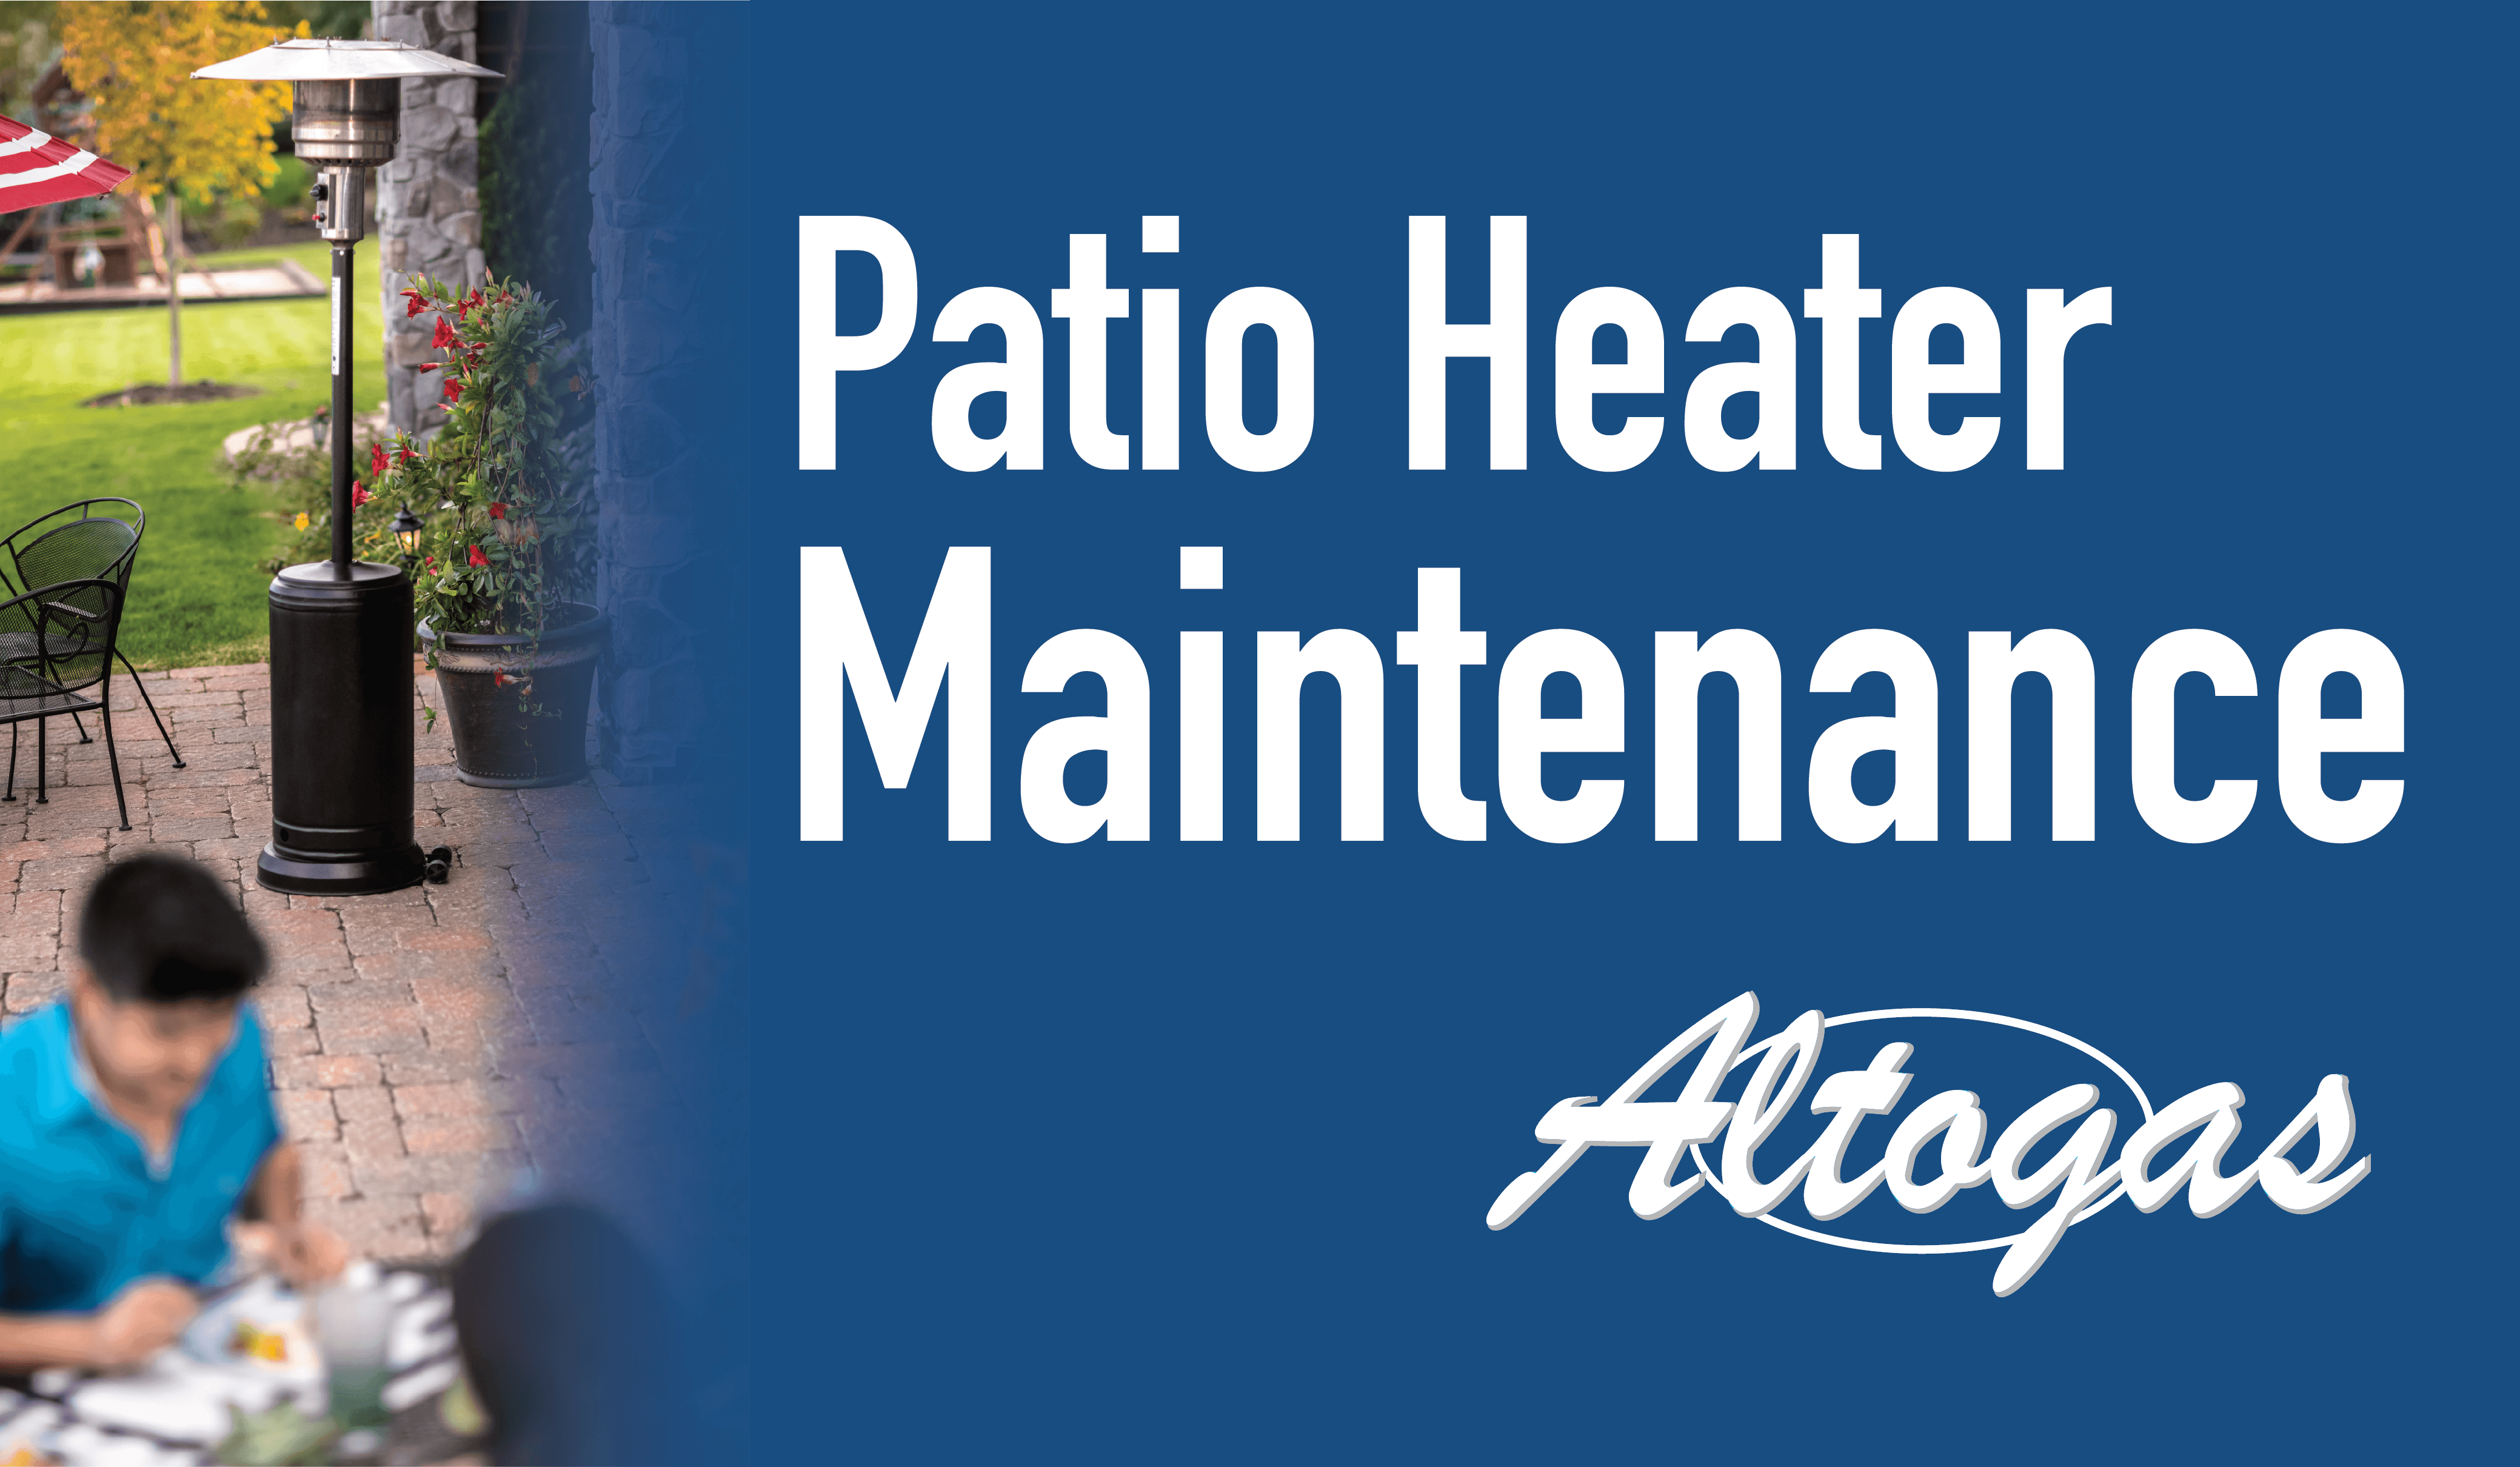 You are currently viewing Patio Heater Maintanence